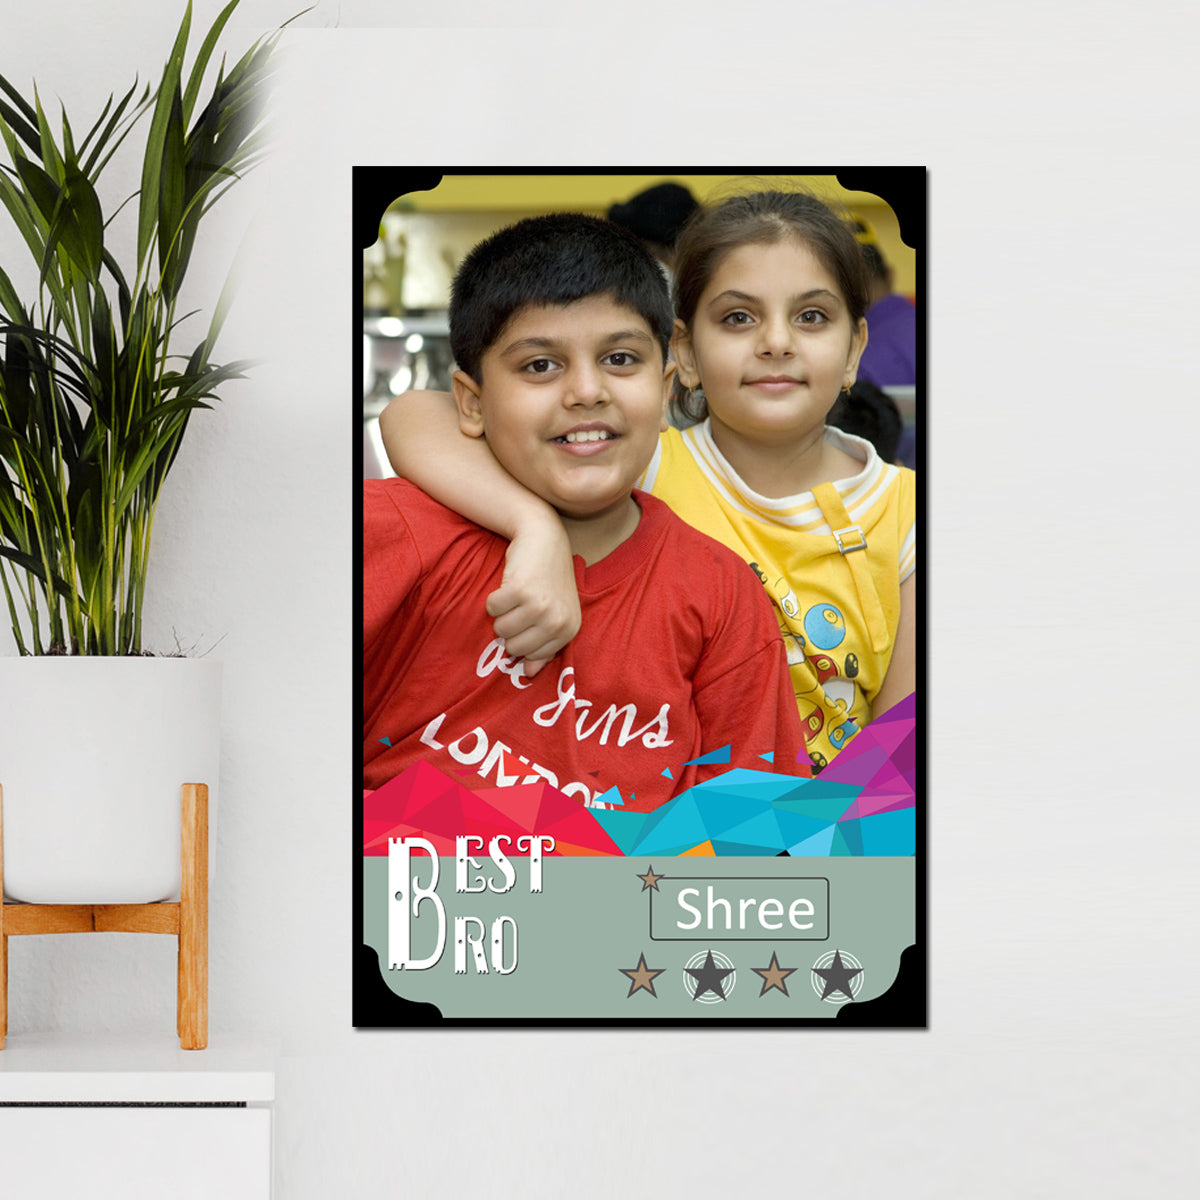 Top 10 Personalized Gifts for Brother in India